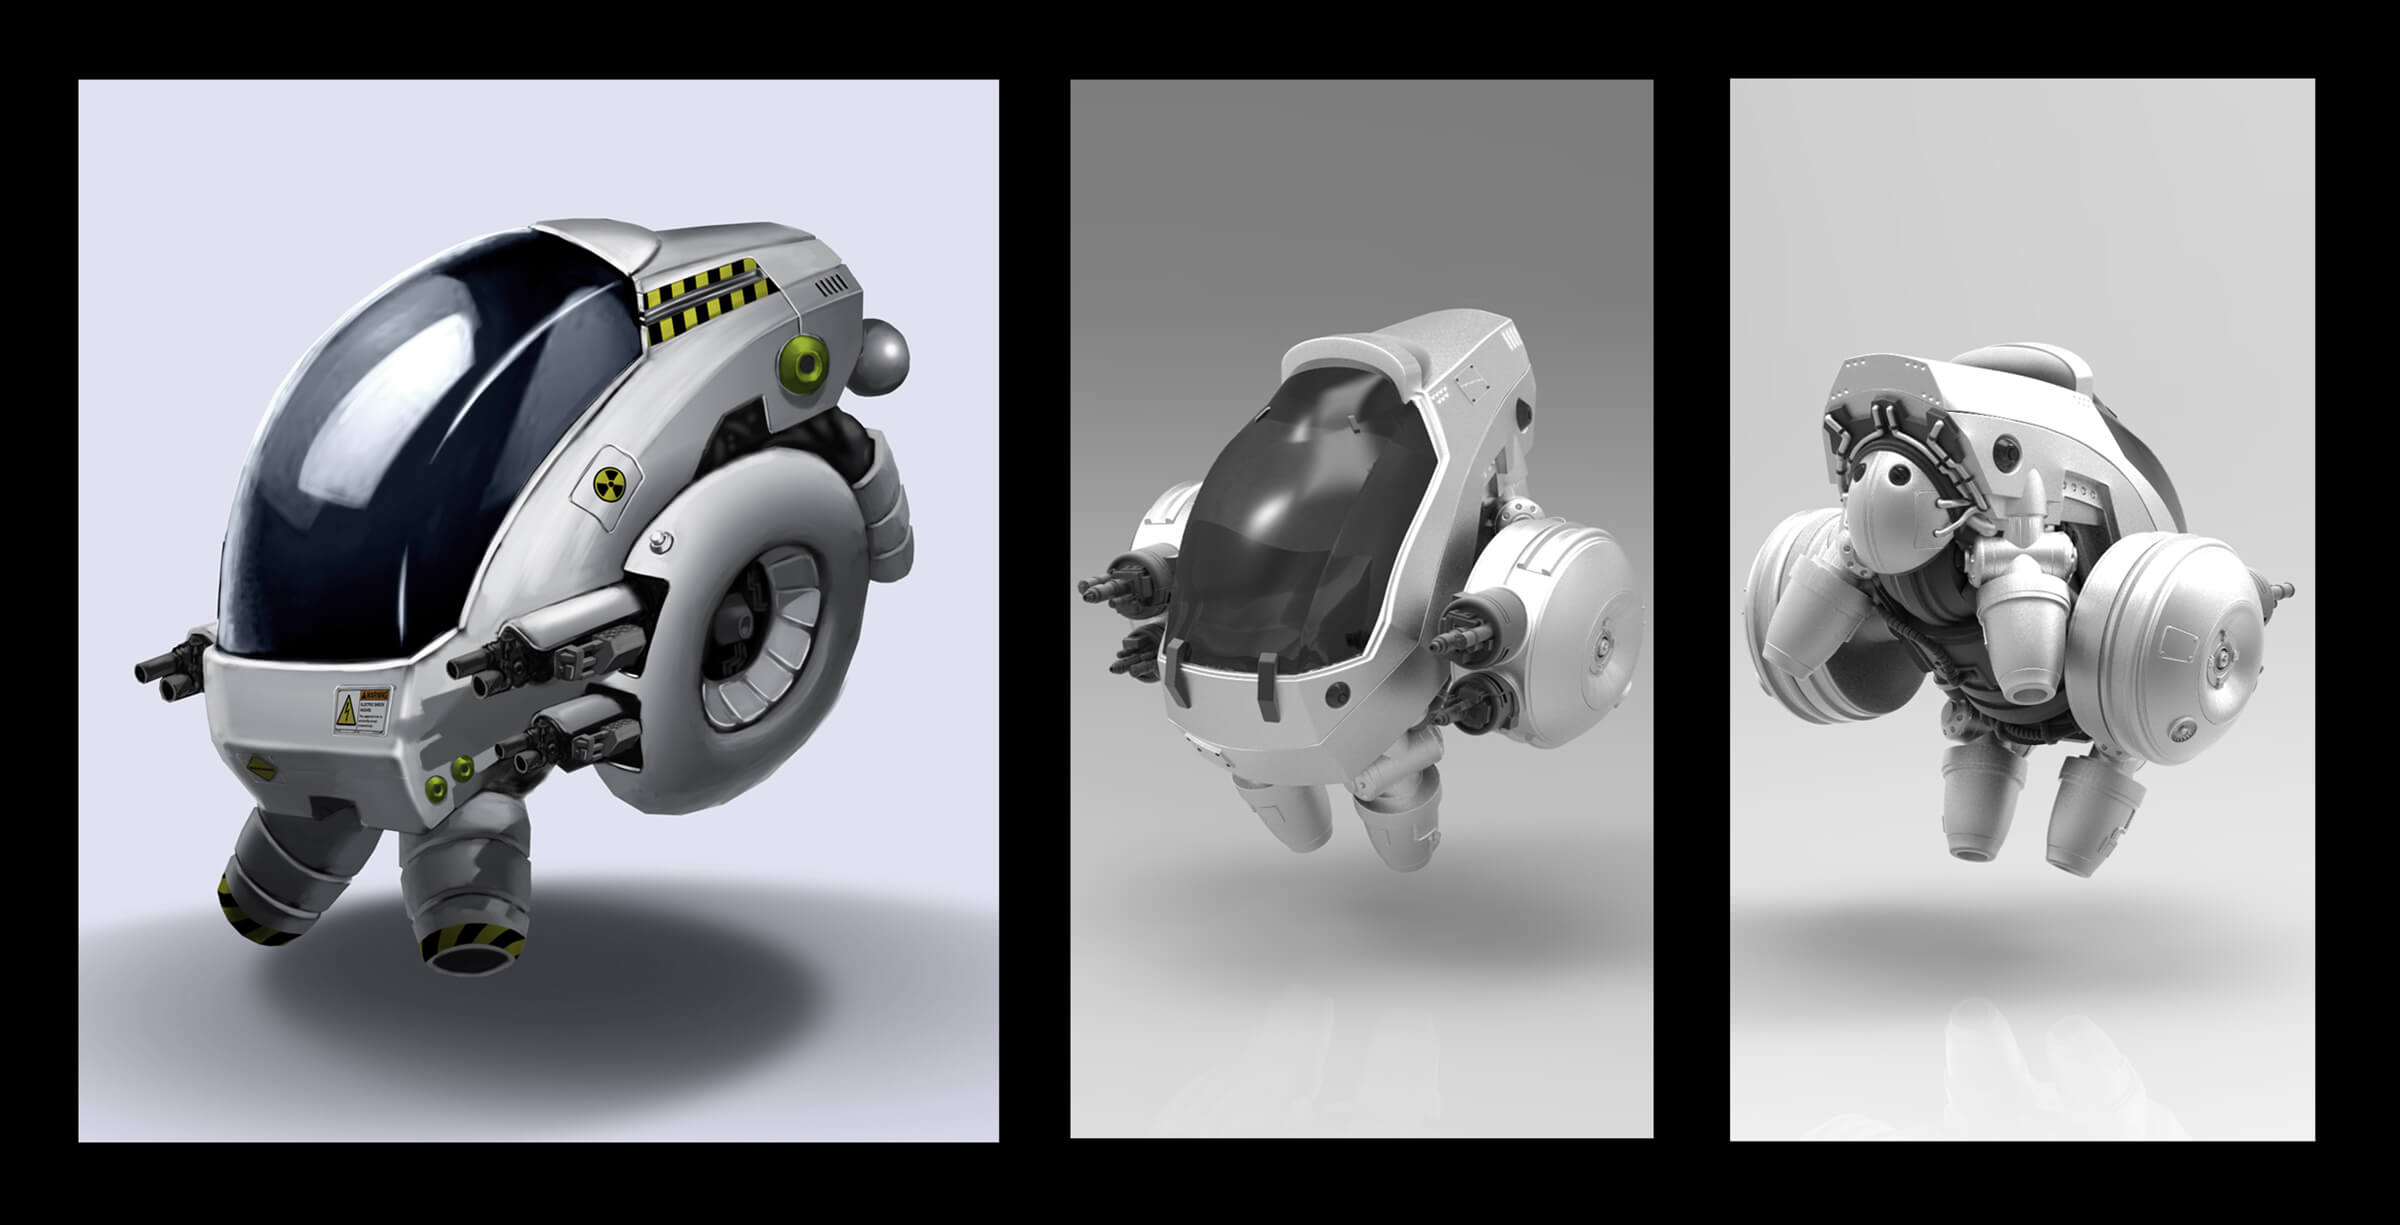 computer-generated 3D model of a robot vehicle that is reminiscent of a turtle